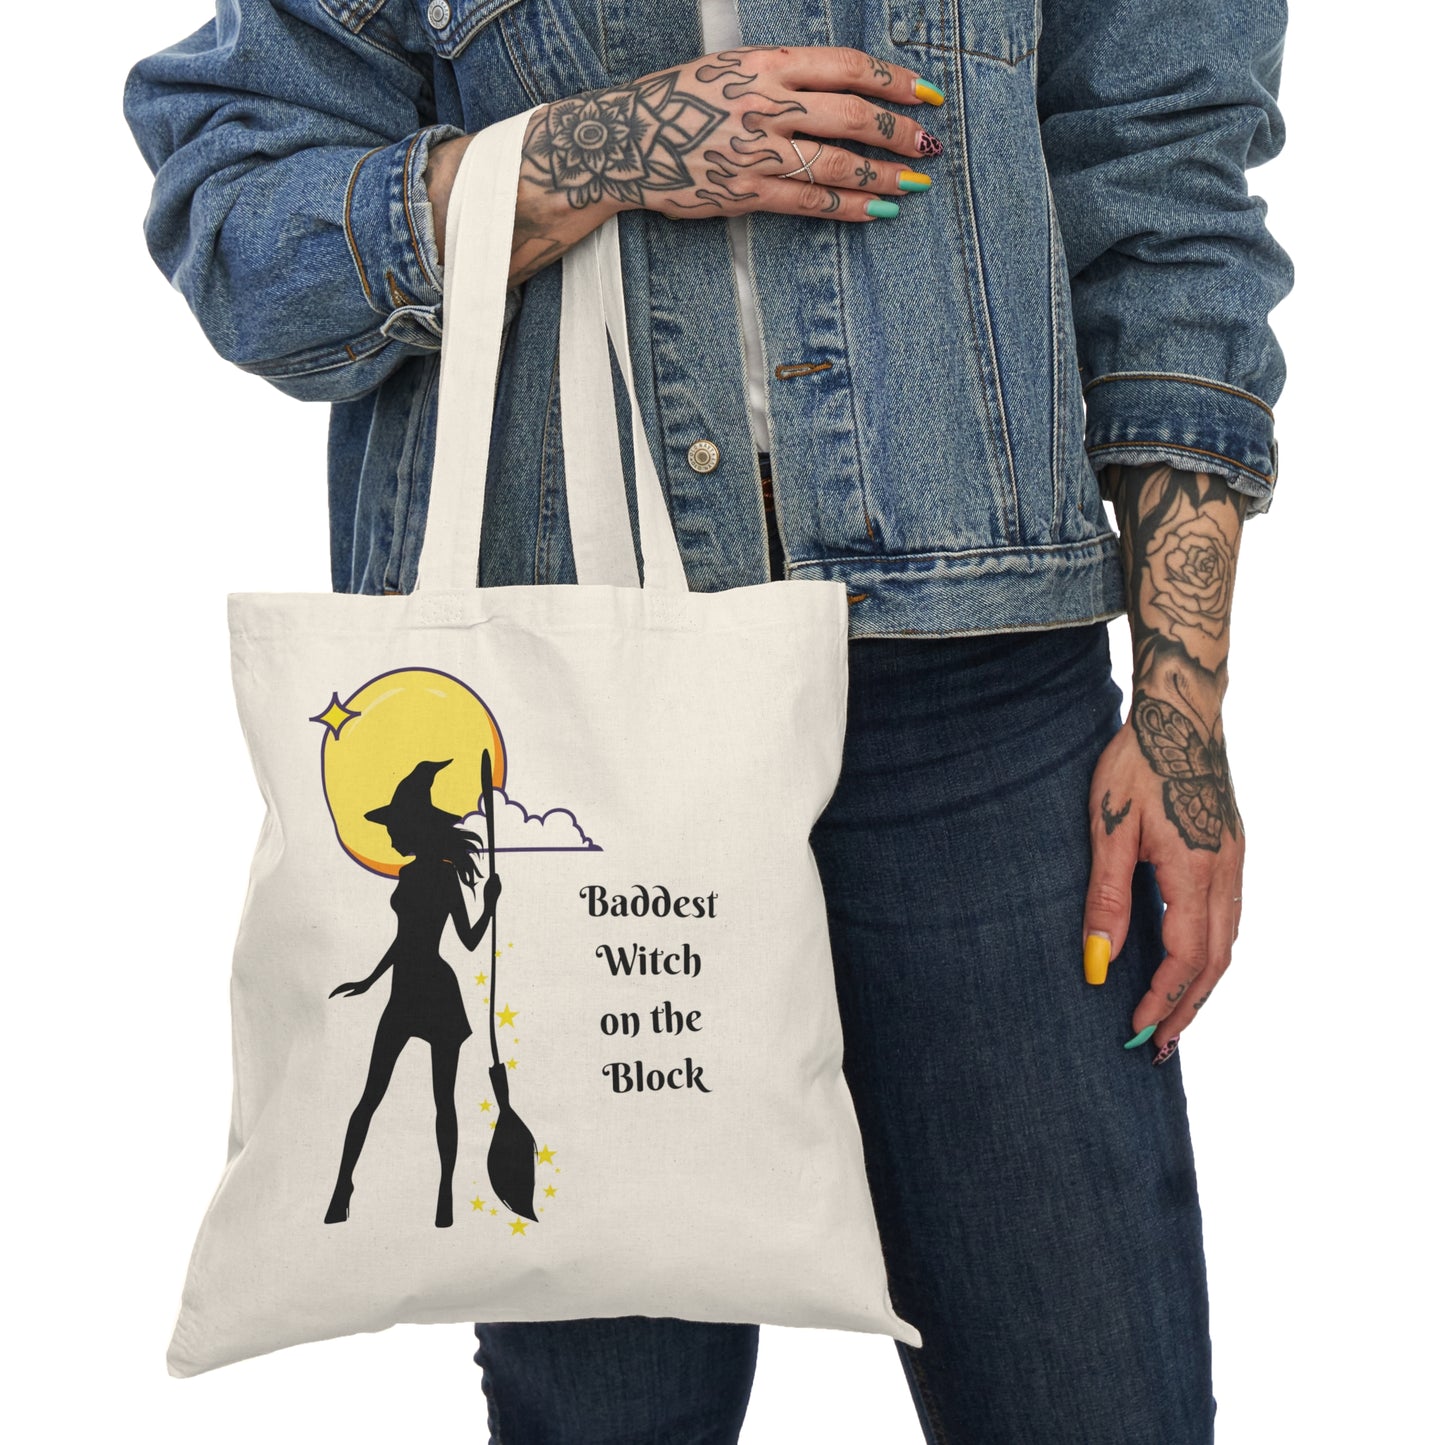 Halloween Tote Bag-Baddest Witch on the Block